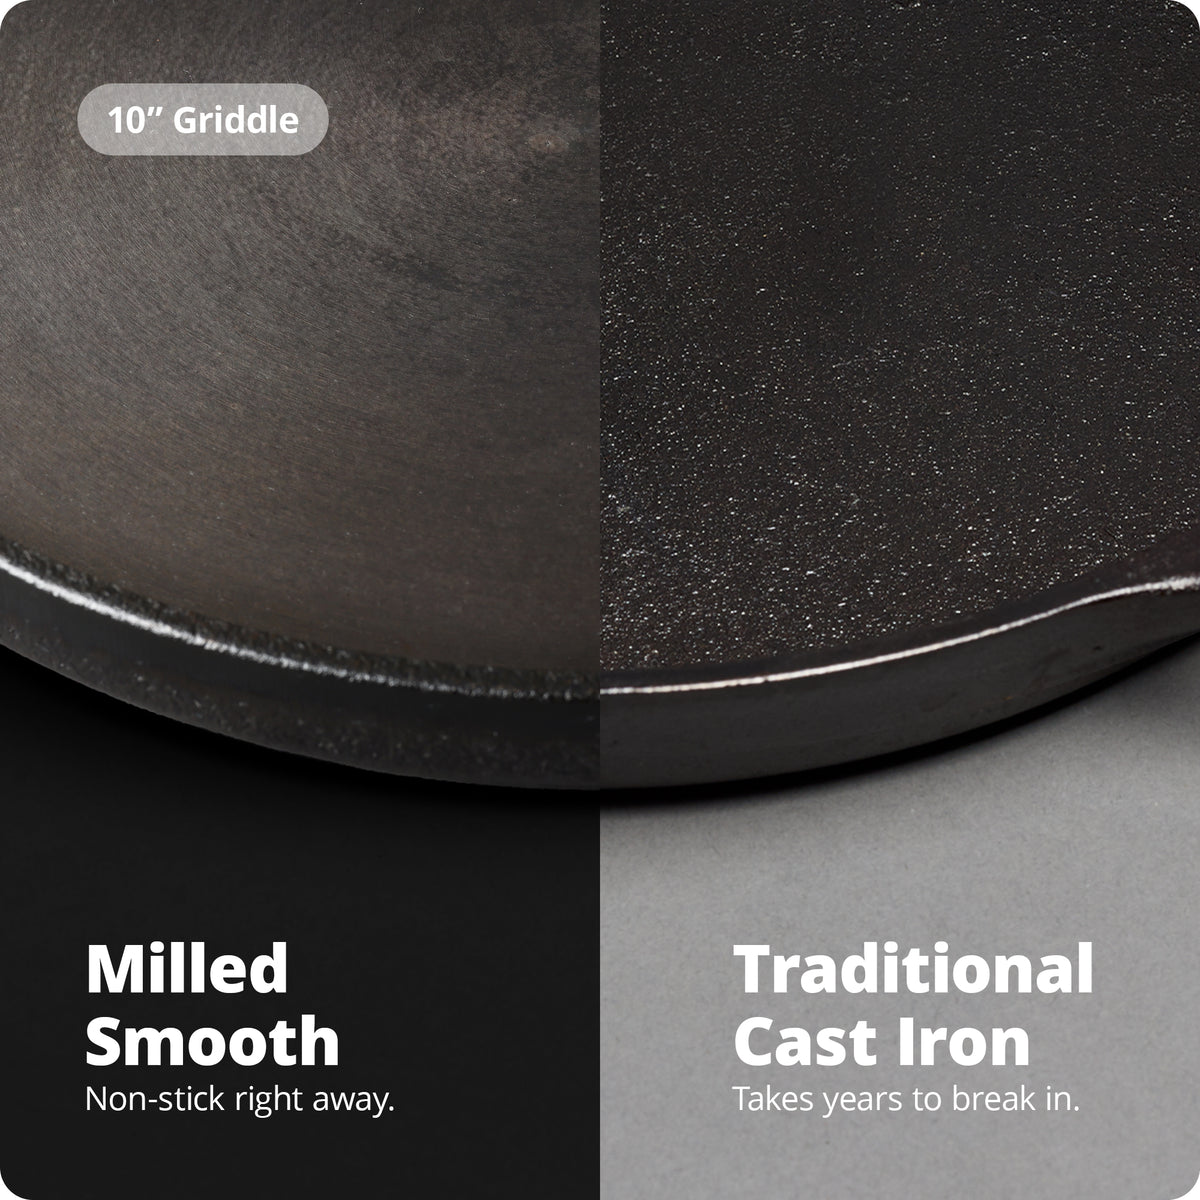 10 Inch Cast Iron Griddle